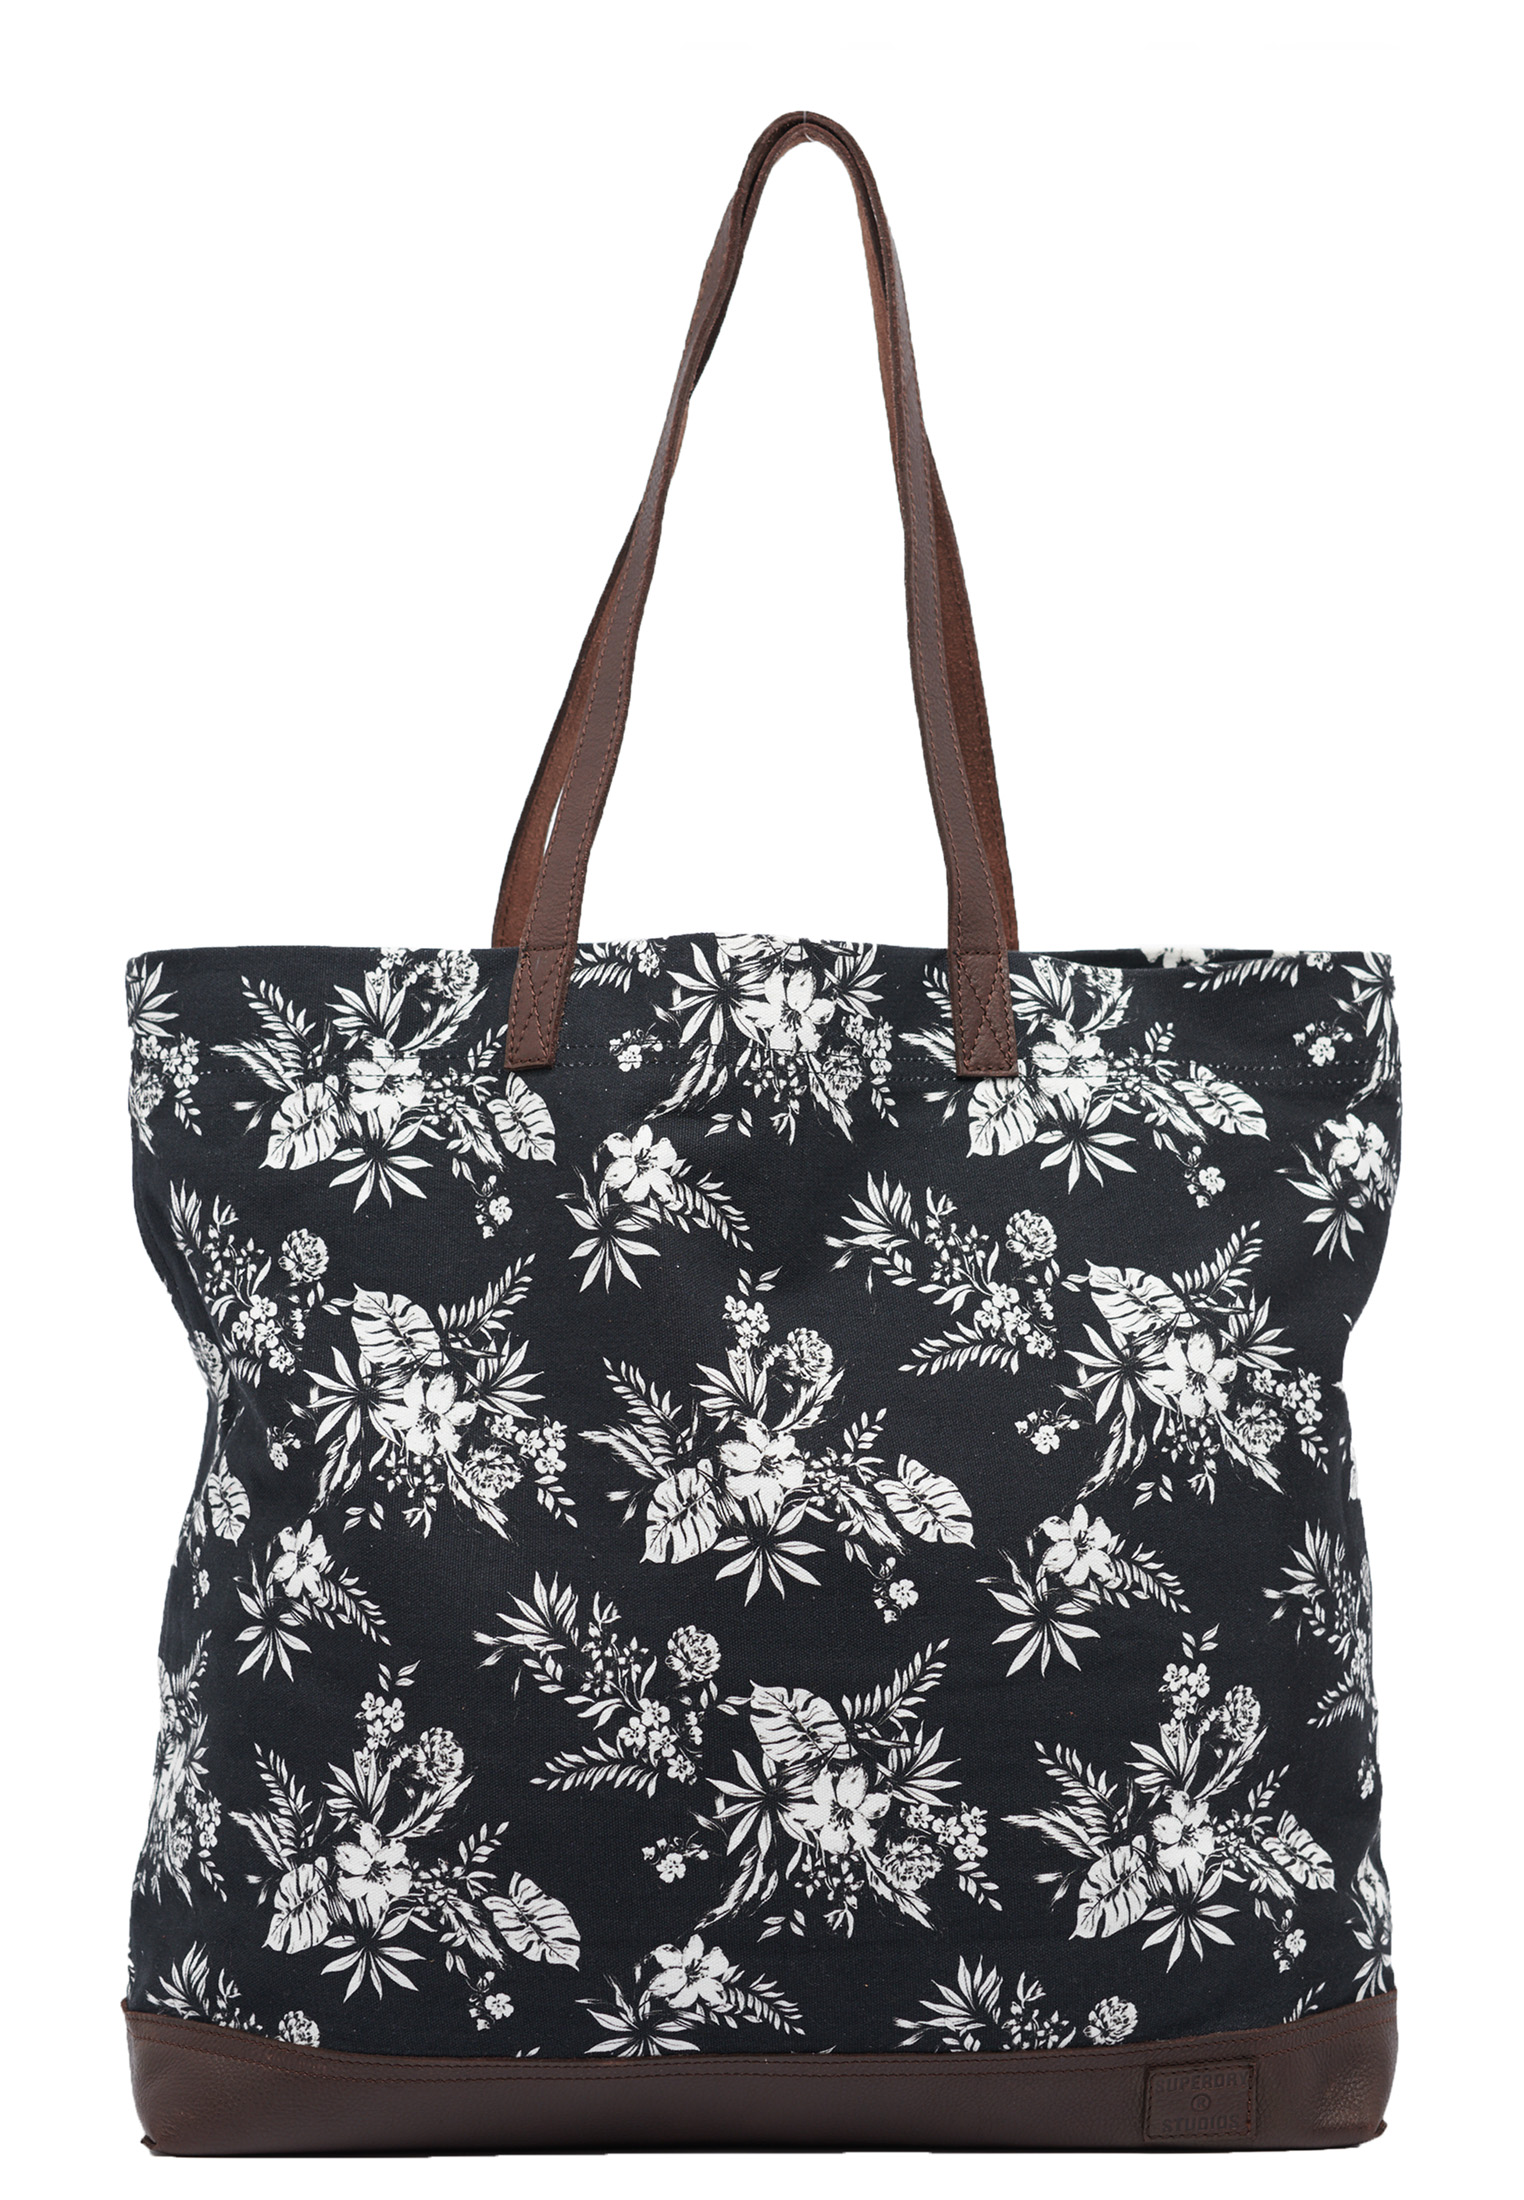 Superdry Womens Large Printed Tote Bag Size 1Size